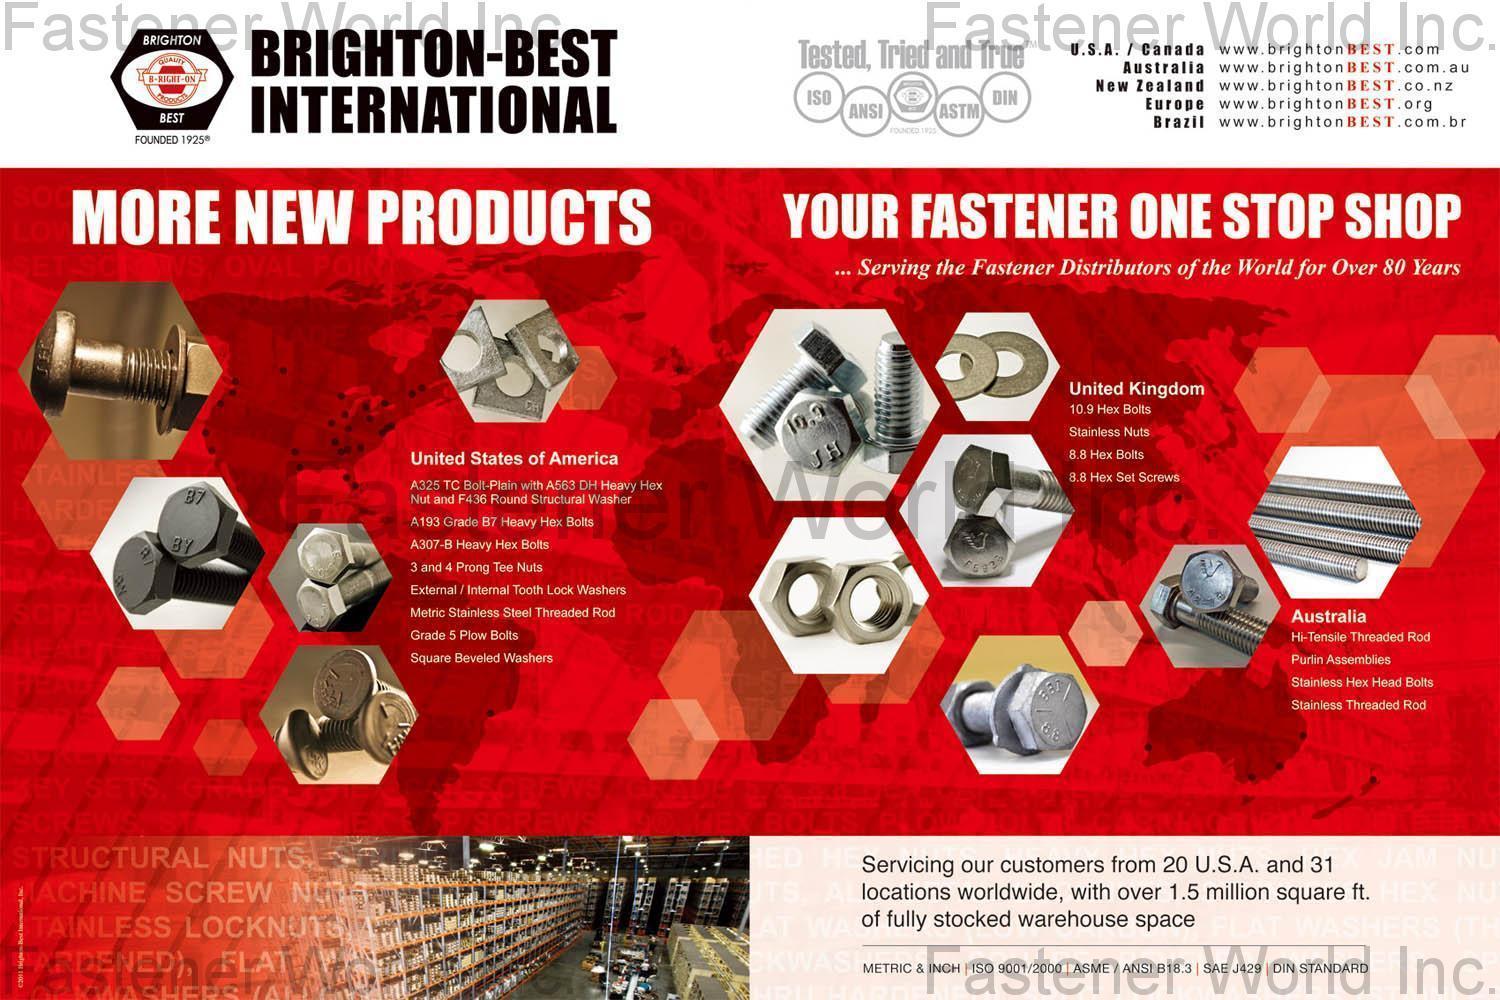 BRIGHTON-BEST INTERNATIONAL, INC.  , Redefining Value, 10.9 Hex Bolts, Stainless Nuts, 8.8 Hex Bolts, 8.8 Hex Set Screws, A325 TC Bolt, A193 Grade B7 Heavy Hex Bolts, 3 & 4 Prong Tee Nuts, Internal Tooth Lock Washers, Grade 5 Plow Bolts, Metric Stainless Steel Threaded Rod, Square Beveled Washers, Hi-Tensile Threaded Rod , Hexagon Head Bolts